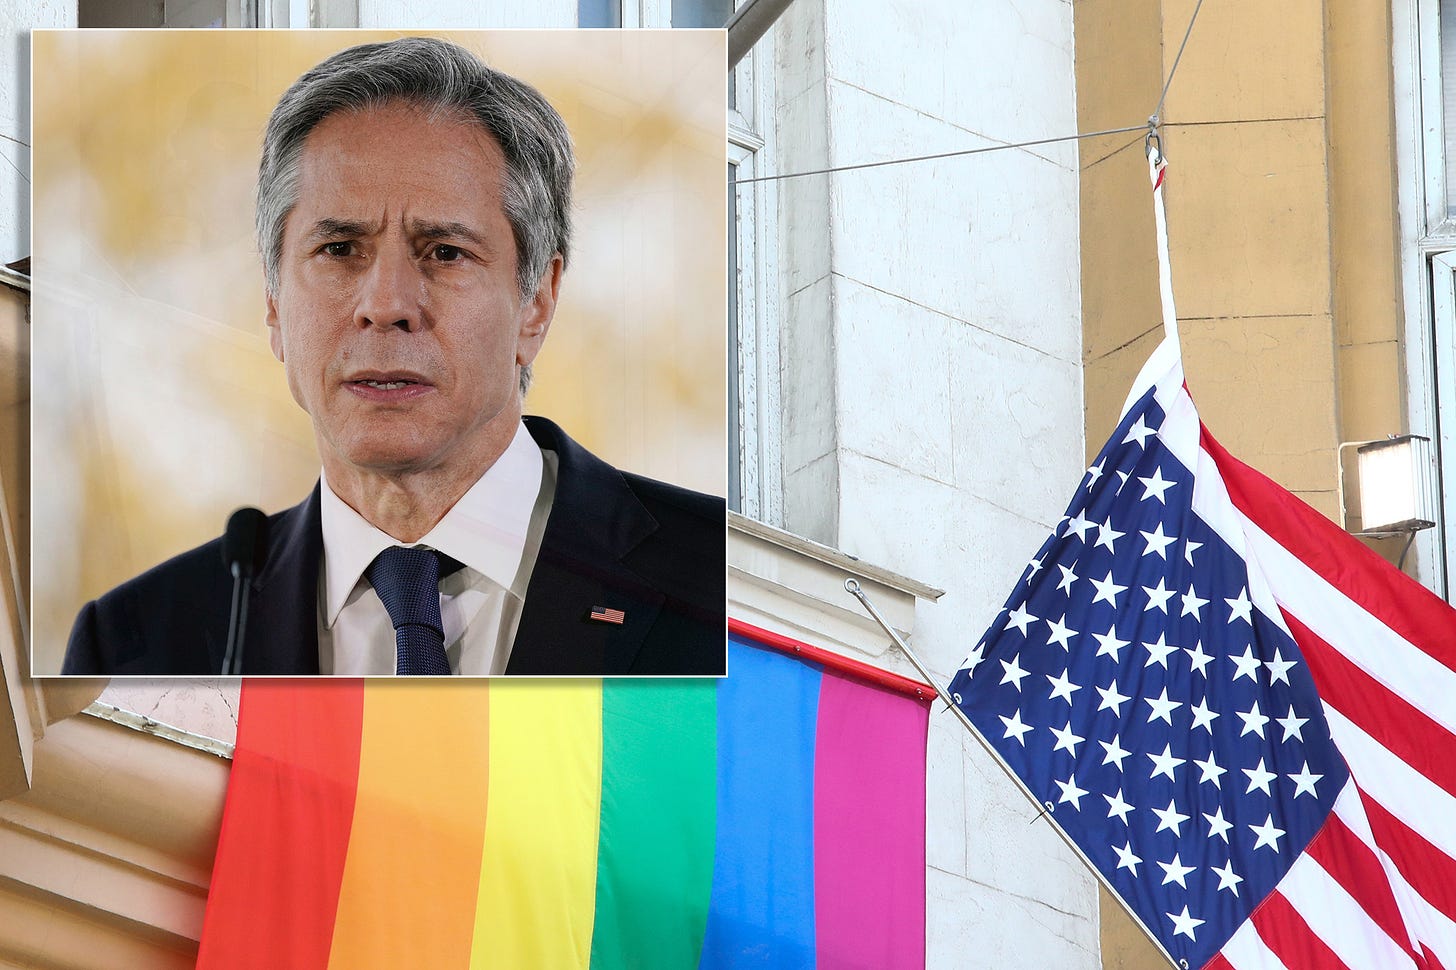 Blinken authorizes US diplomatic missions to fly Pride flag